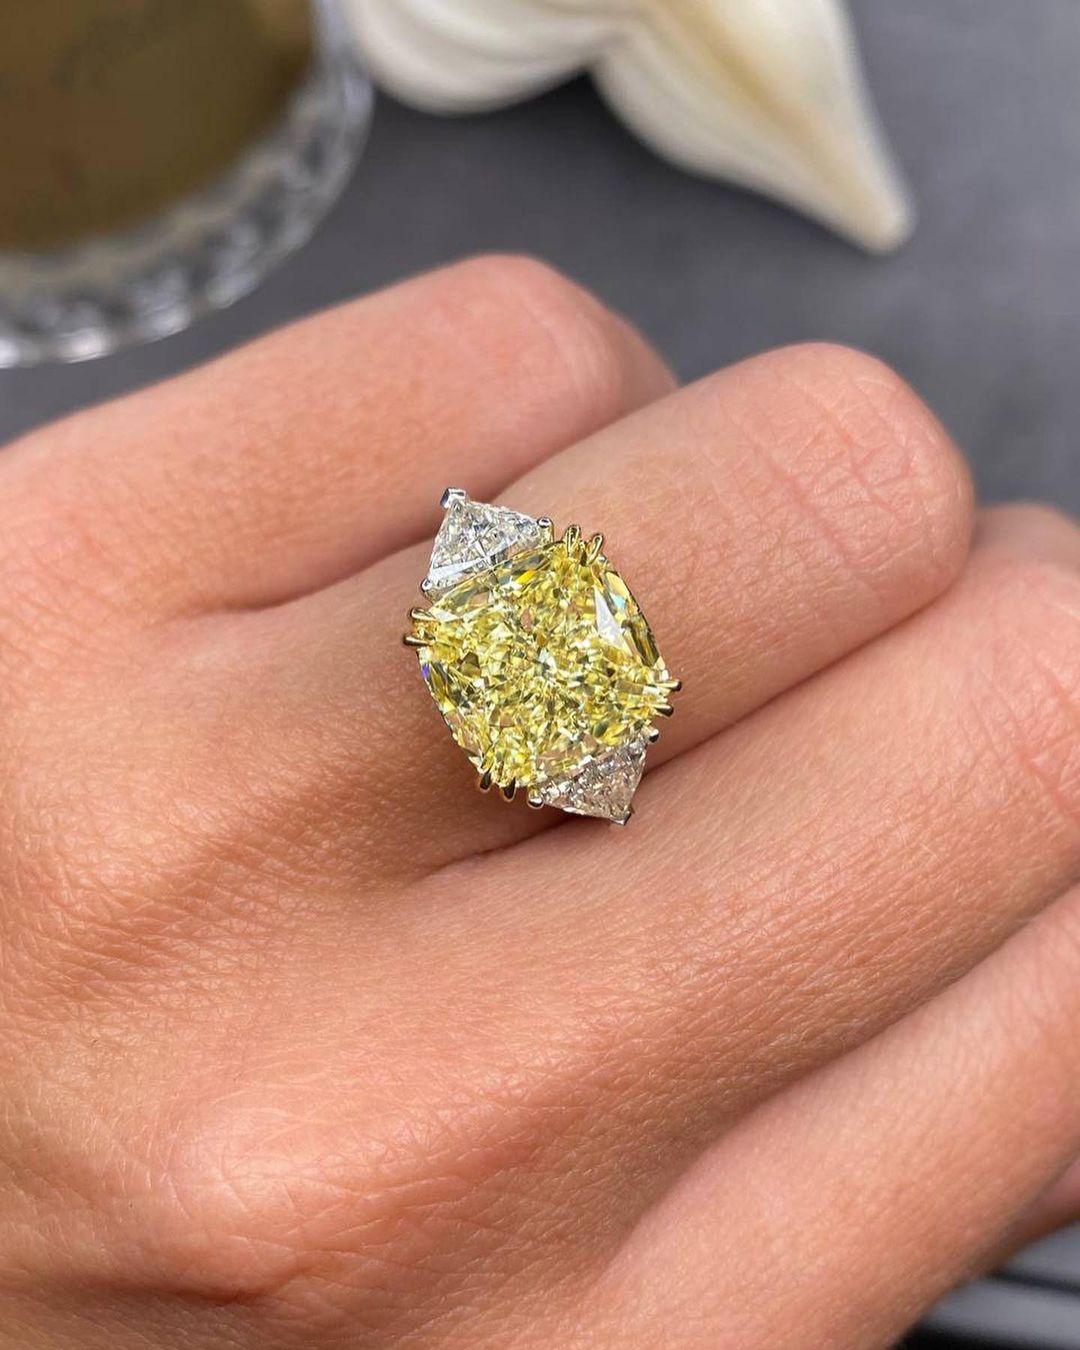 Cushion Cut Exceptional GIA Certified 5.15 Carat Fancy Intense Yellow Diamond Ring For Sale